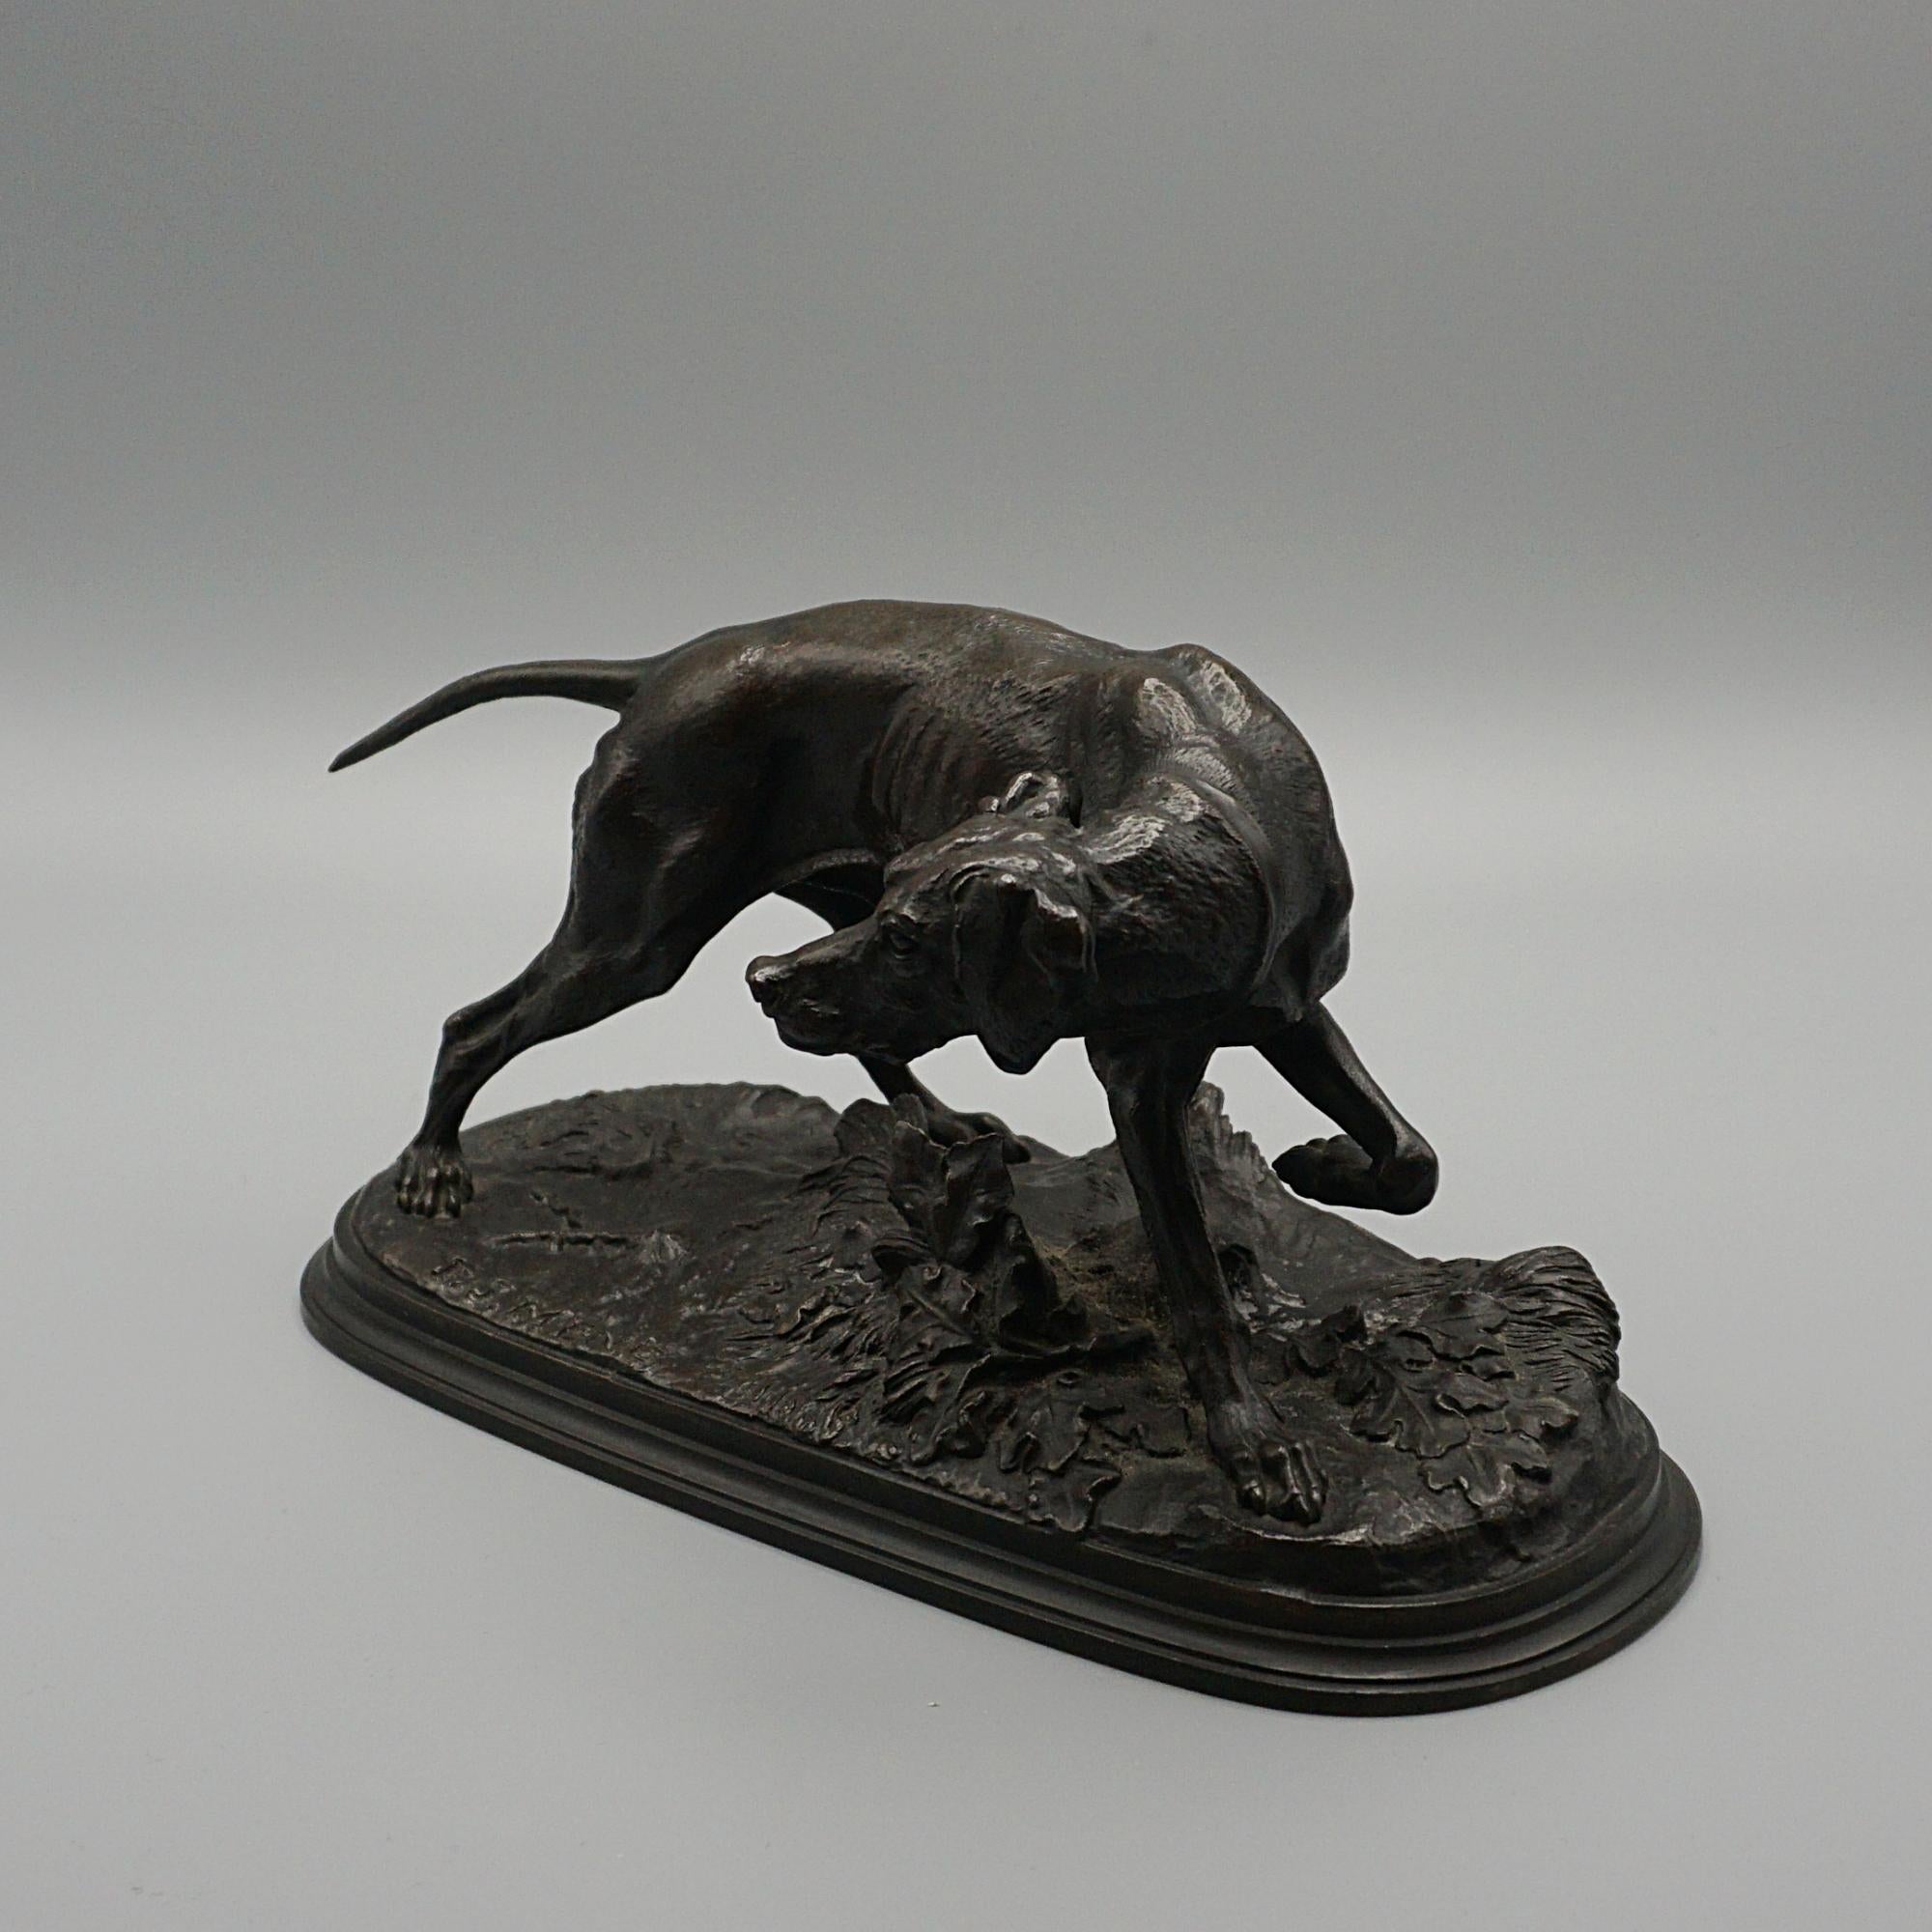 A late Victorian Bronze Pointer by Pierre Jules Mene (1810-1879). Excellent patination, signed 'P.J. Mene' to base. 

Dimensions: H 11cm W 22cm D 9.5cm 

Origin: French 

Date: Circa 1960

Pierre- Jules Mêne was born in 1810. As a teenager, he